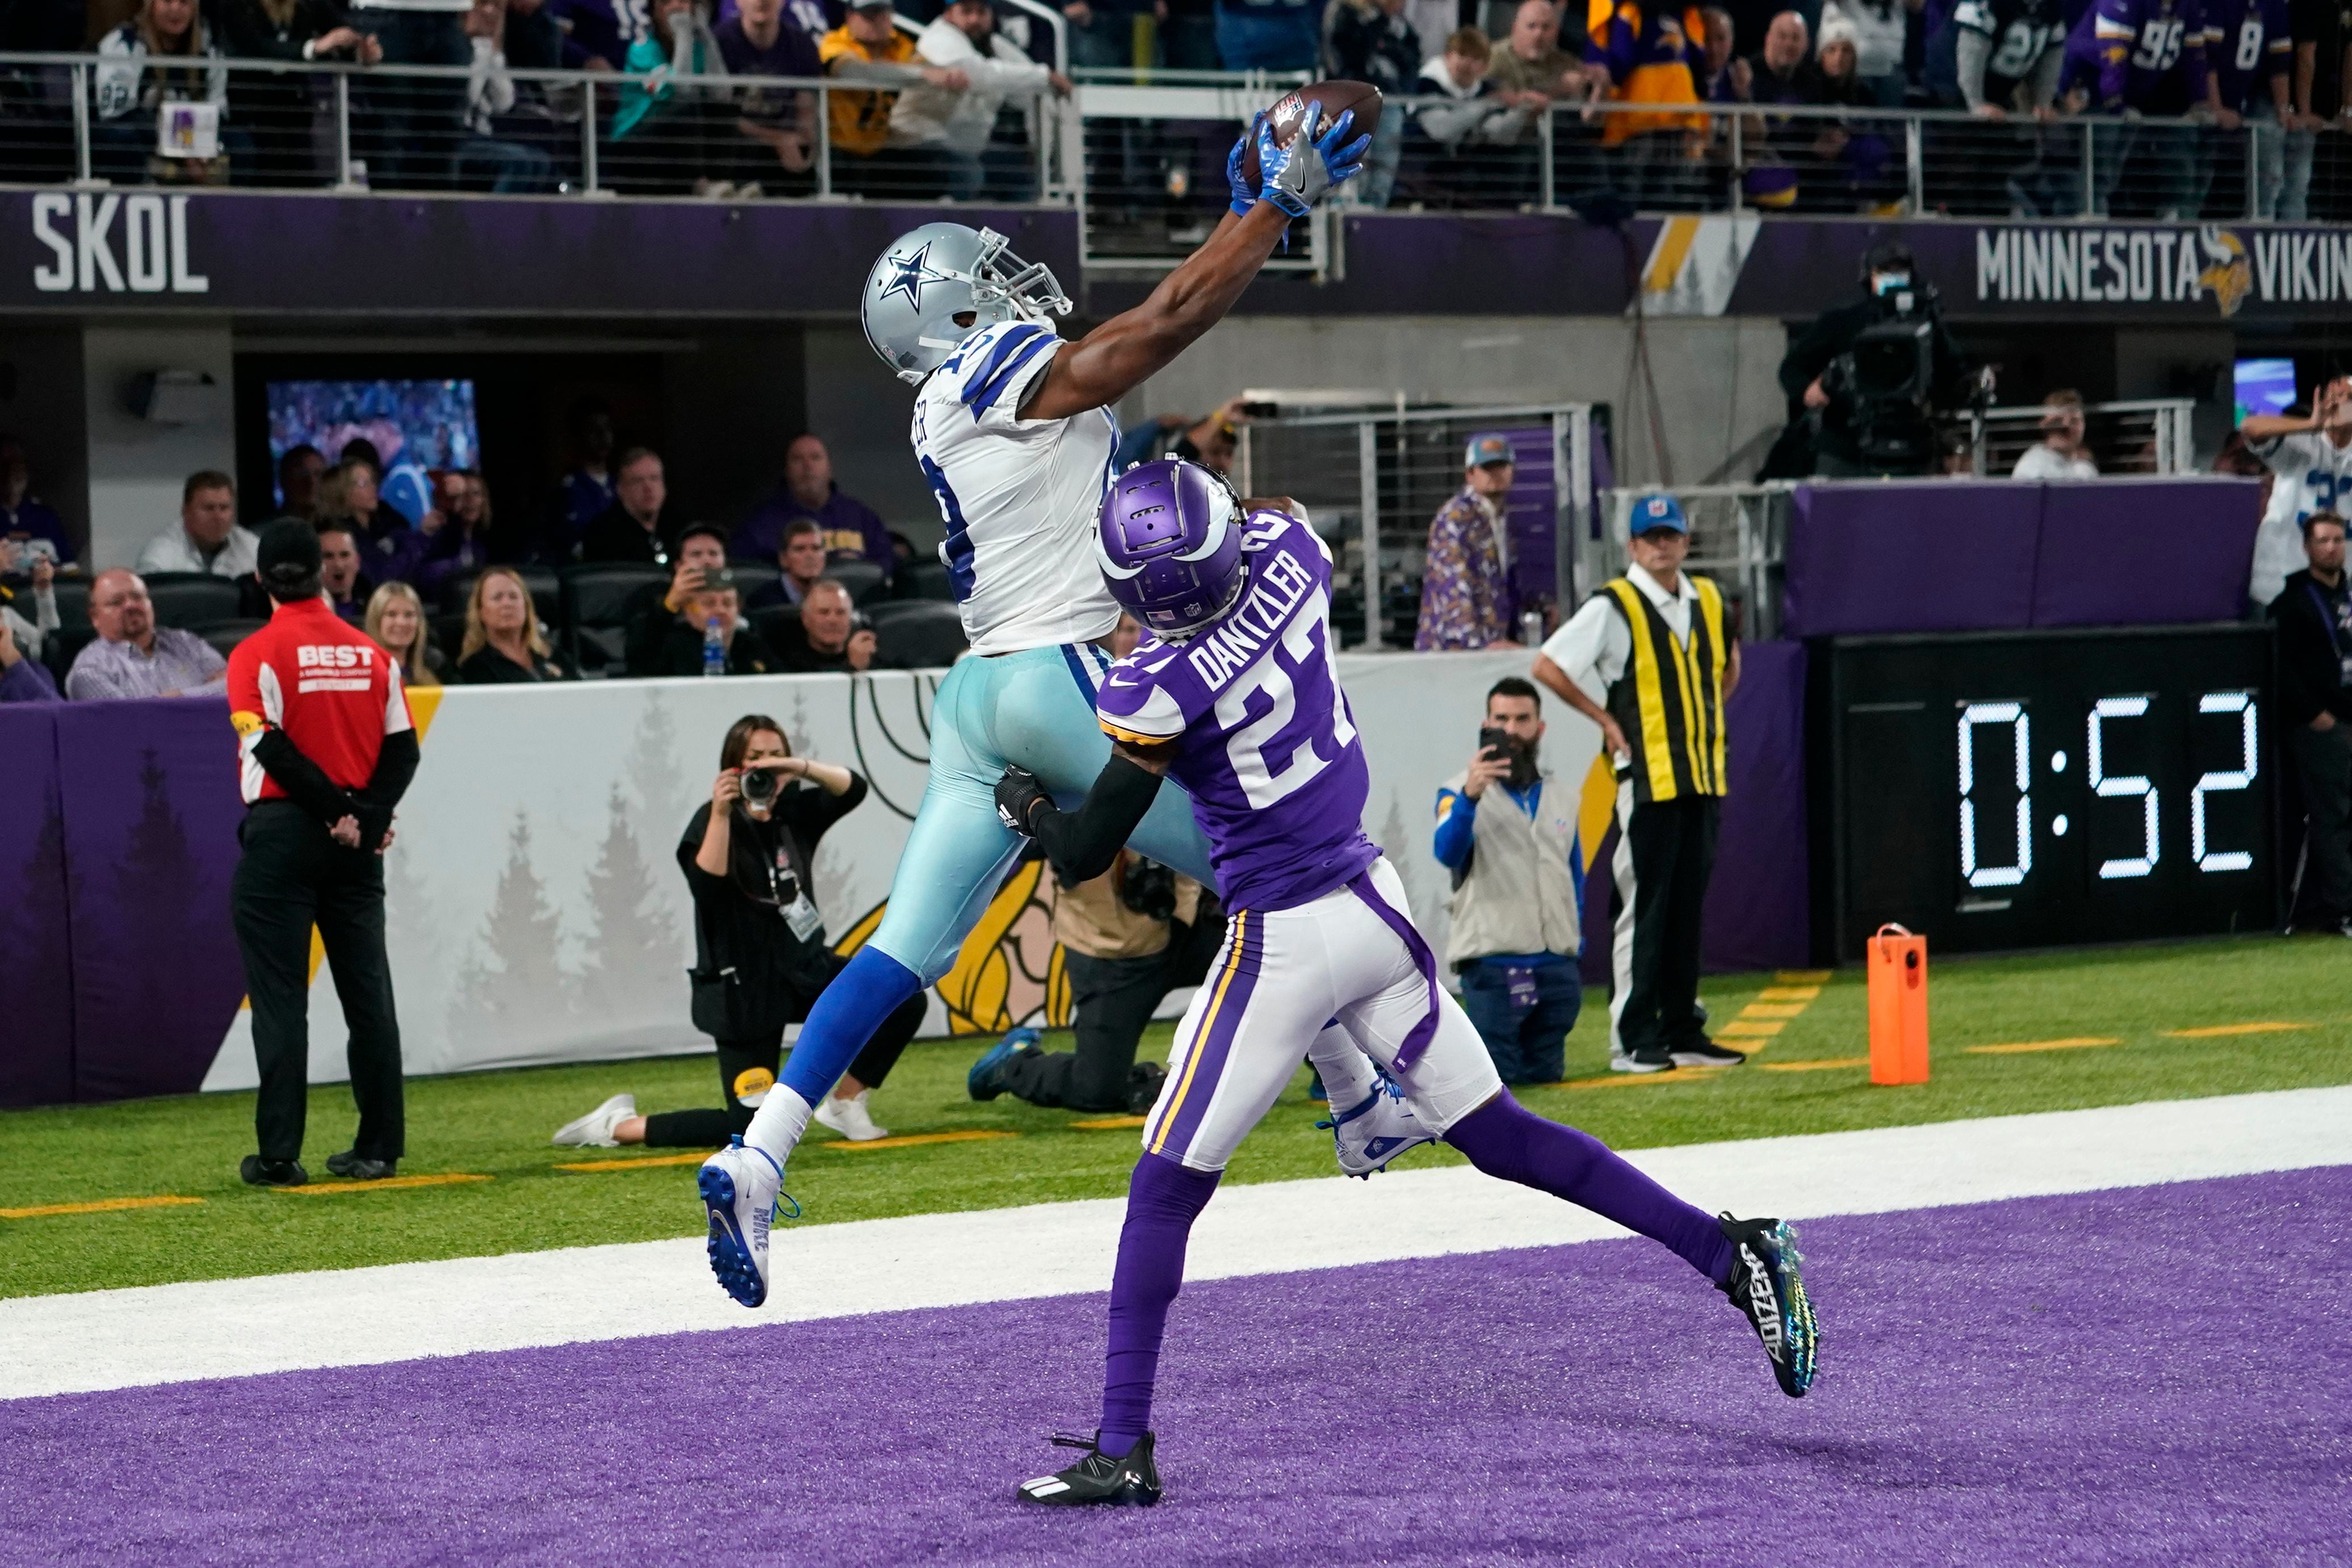 Cooper-to-Cooper touchdown pass sends Vikings to last-minute